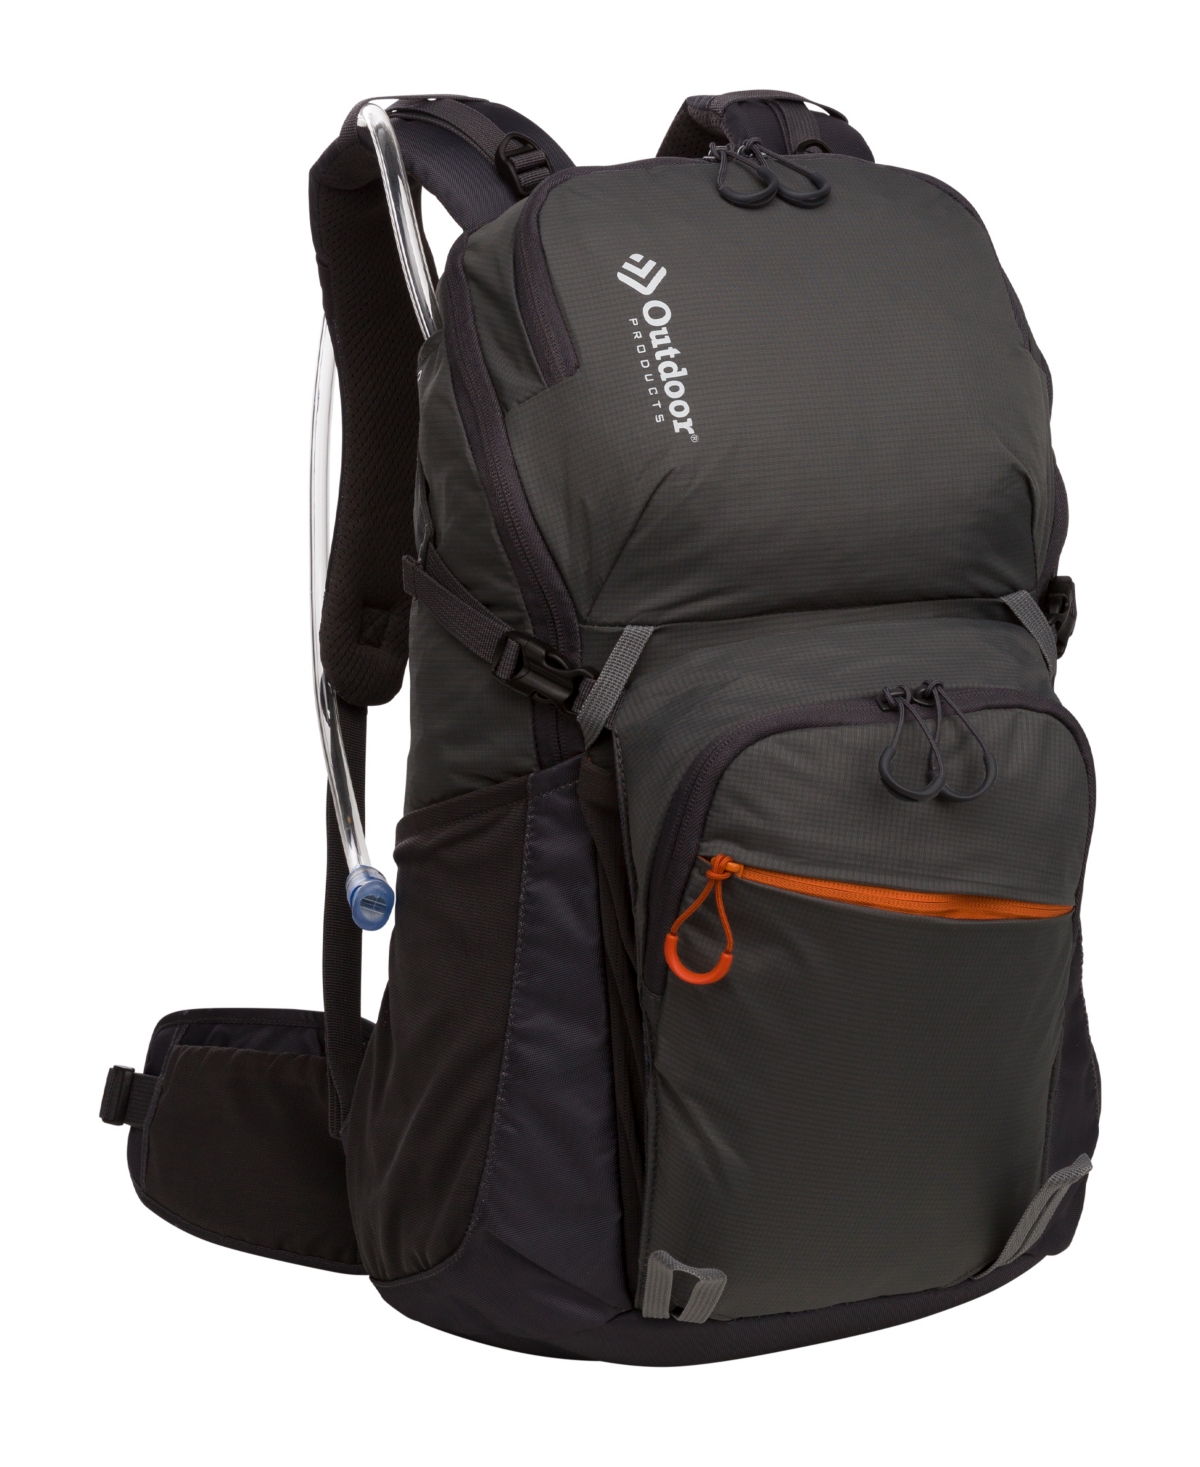 Grand View H2O Backpack - Gray